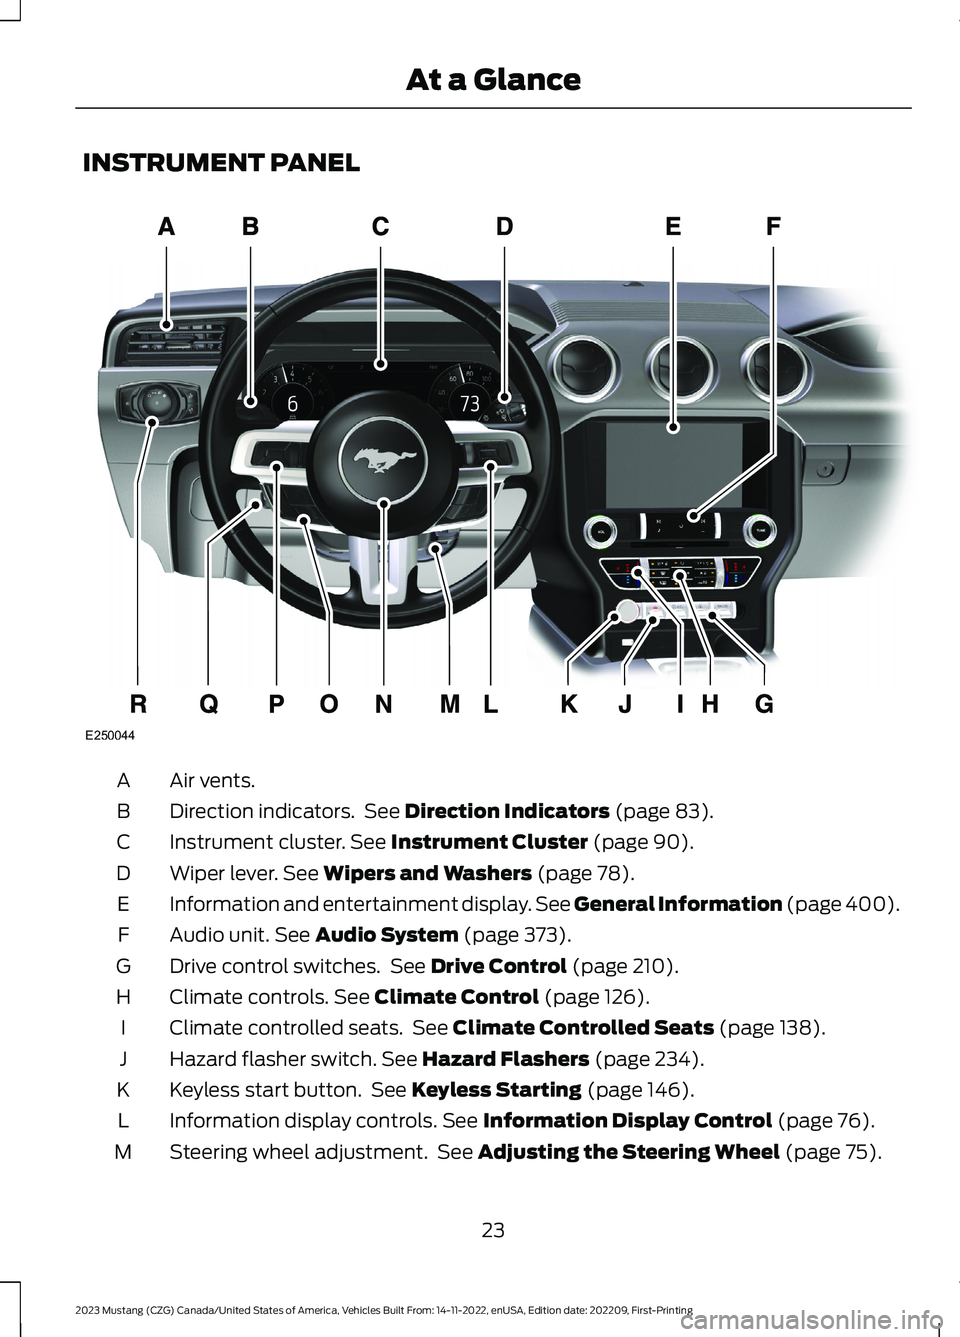 FORD MUSTANG 2023  Owners Manual INSTRUMENT PANEL
Air vents.A
Direction indicators. See Direction Indicators (page 83).B
Instrument cluster. See Instrument Cluster (page 90).C
Wiper lever. See Wipers and Washers (page 78).D
Informati